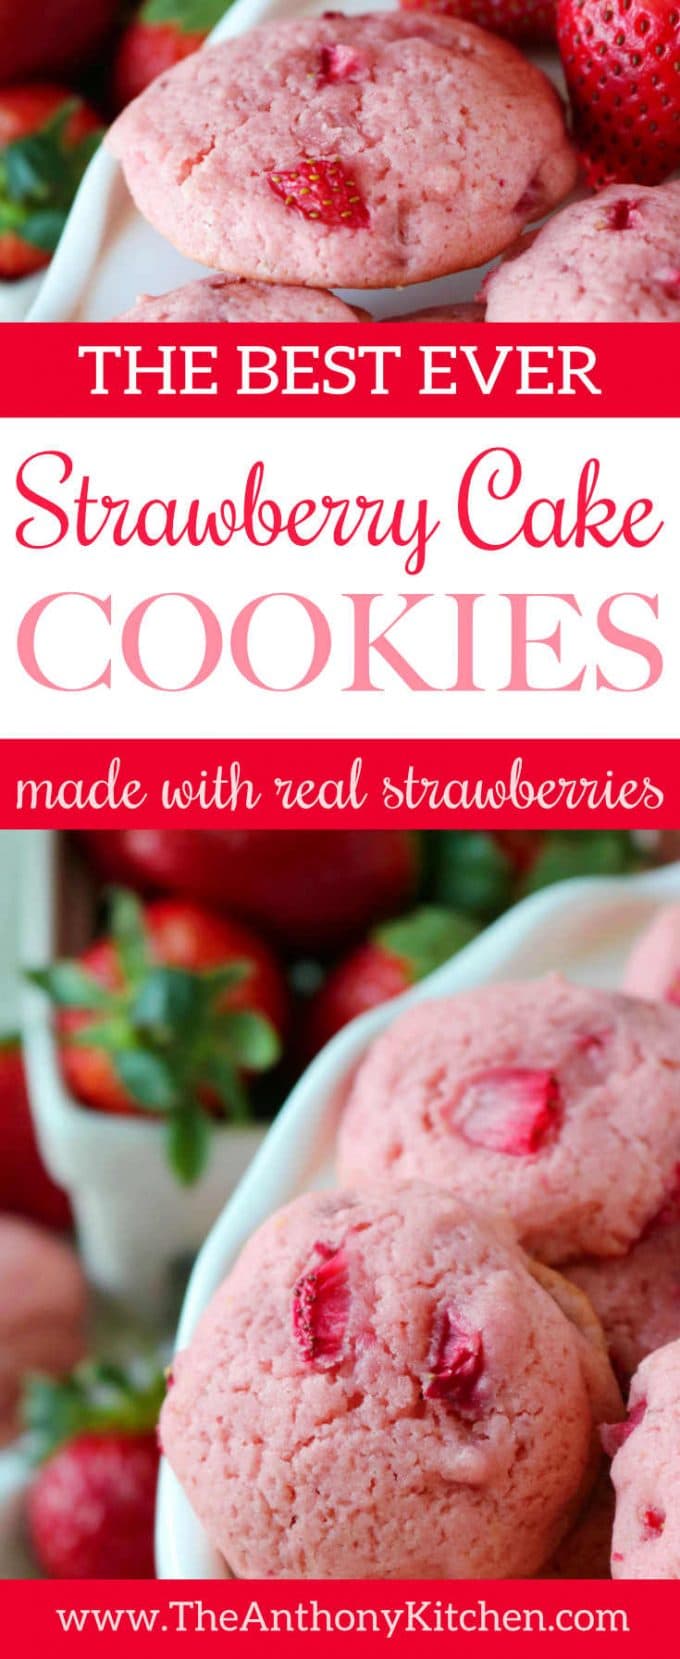 strawberry cake cookies with real strawberries